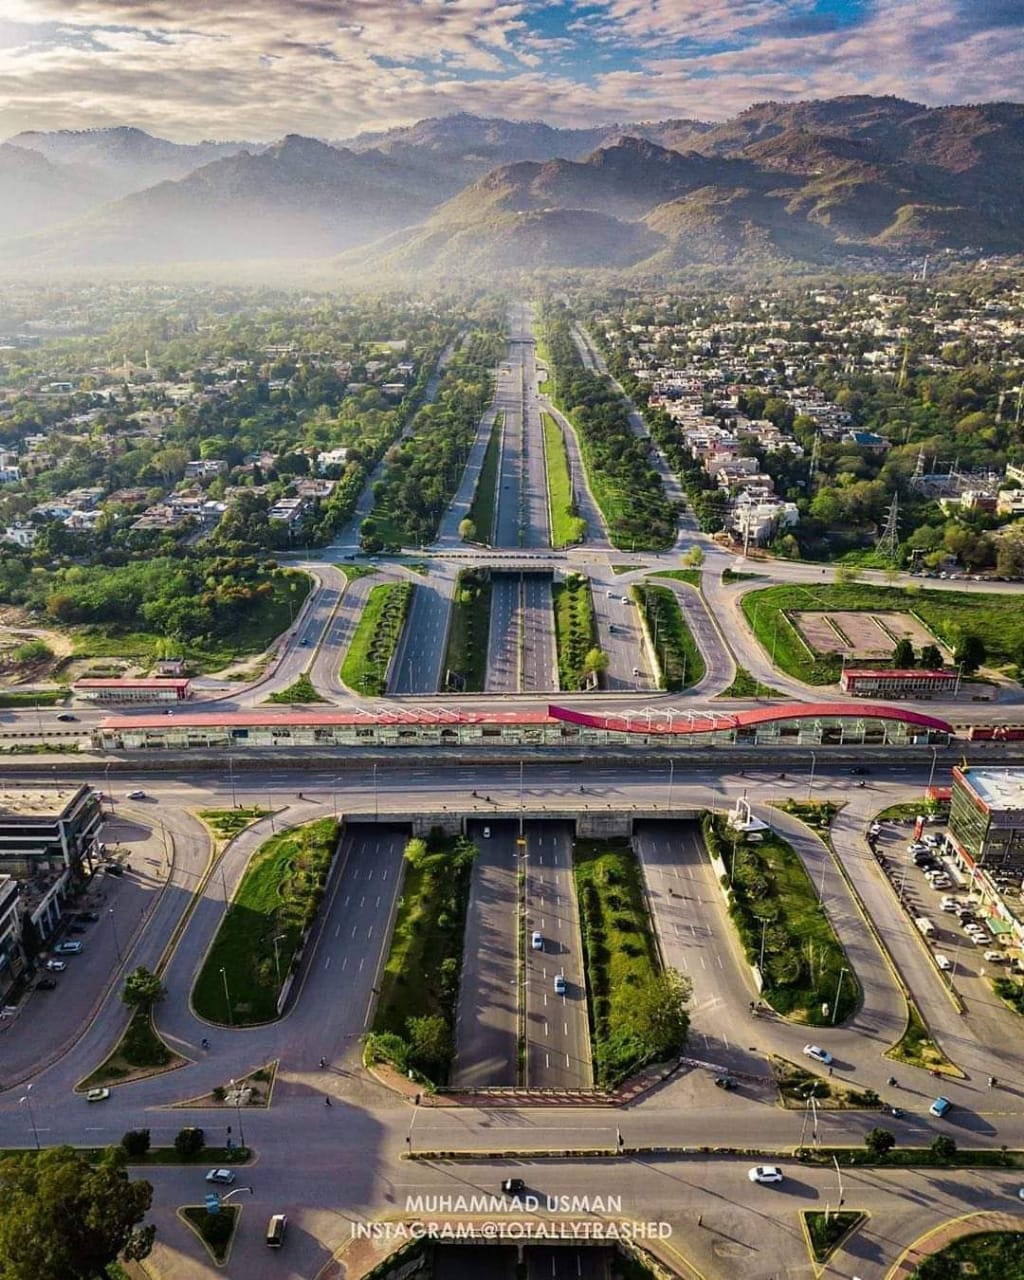 Islamabad 10th Avenue Project Will Be Completed In 2023